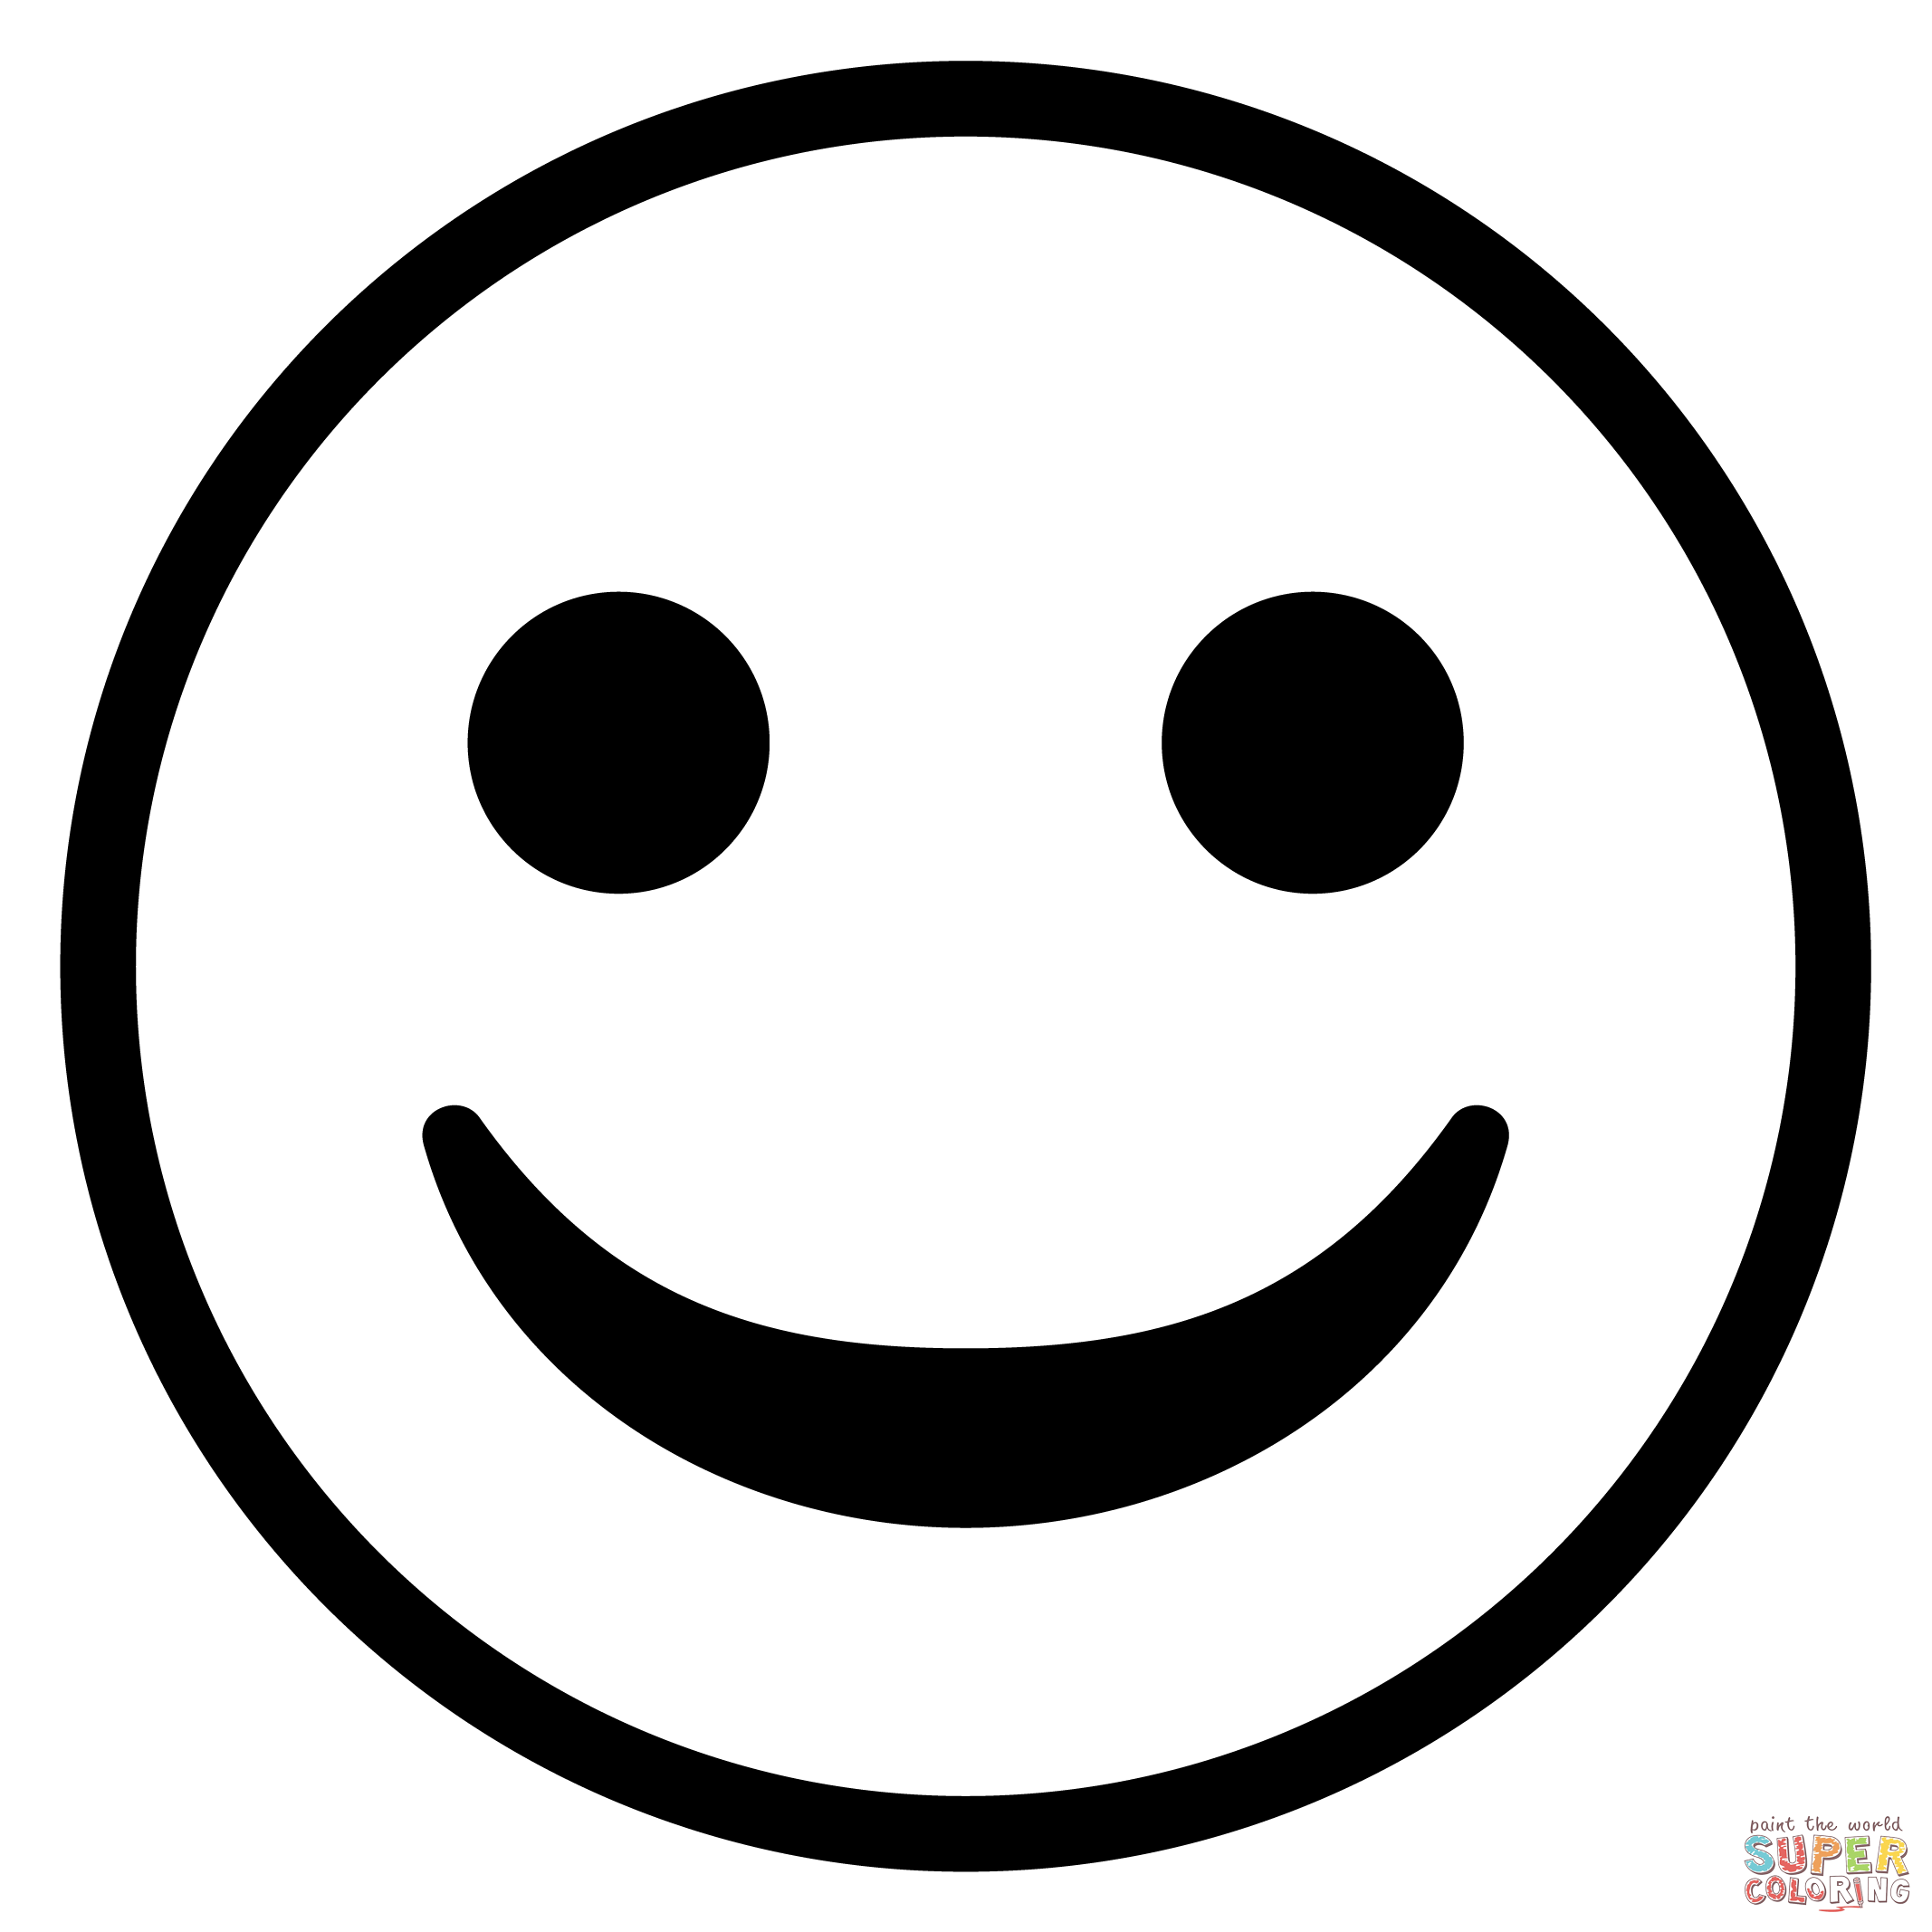 Smiling face emoji coloring page free printable coloring pages